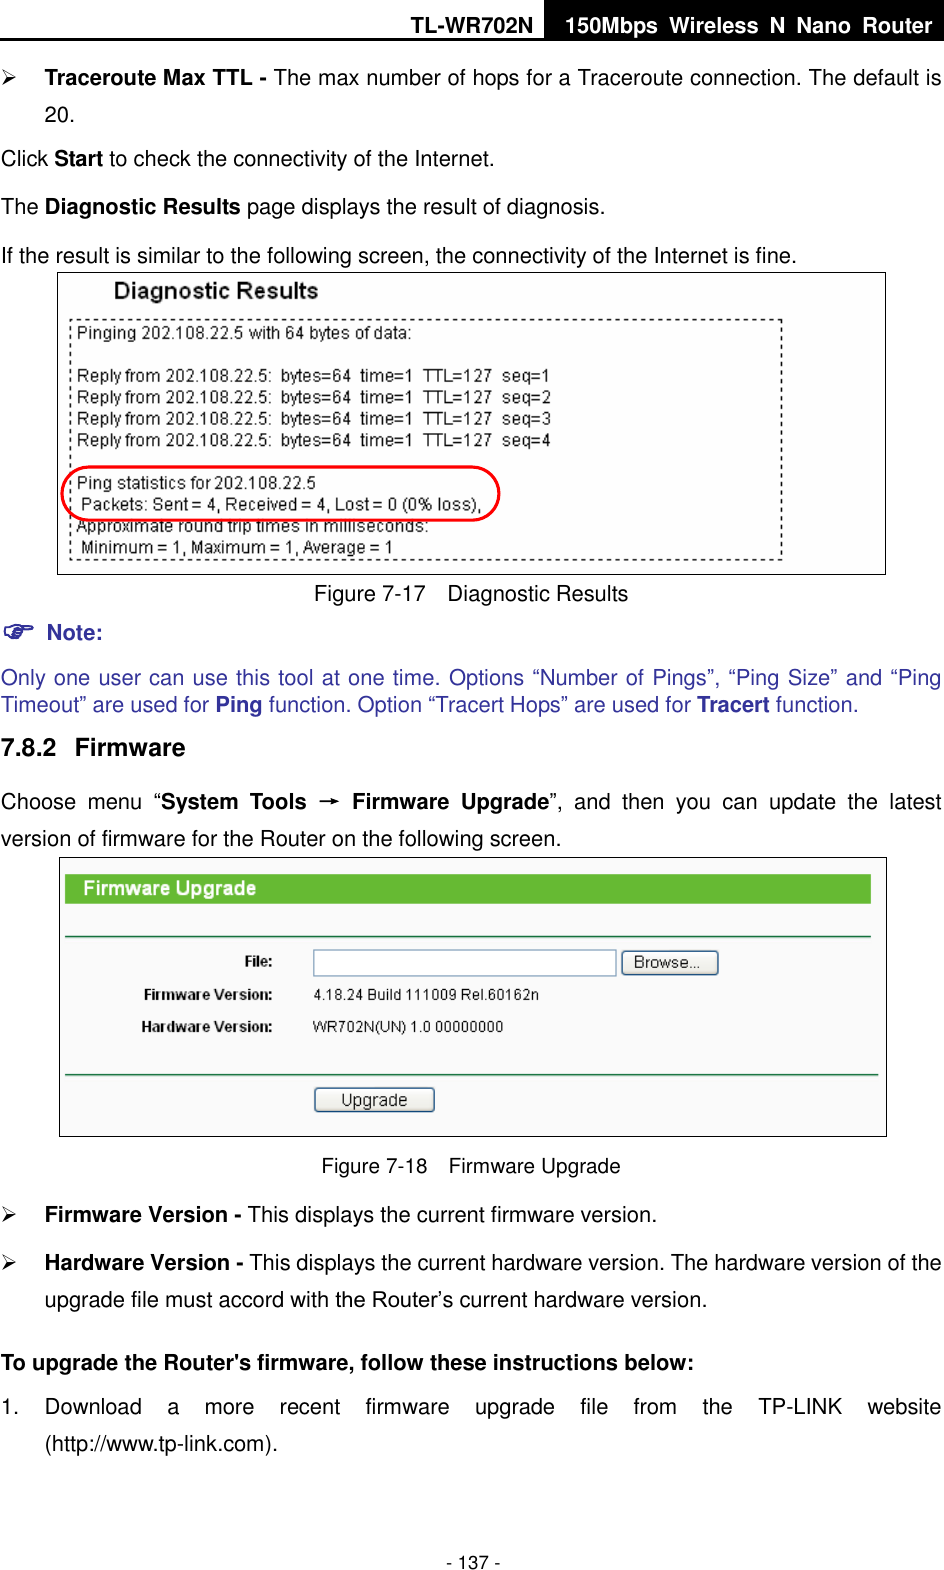 TL-WR702N 150Mbps  Wireless  N  Nano  Router  - 137 -  Traceroute Max TTL - The max number of hops for a Traceroute connection. The default is 20. Click Start to check the connectivity of the Internet.   The Diagnostic Results page displays the result of diagnosis. If the result is similar to the following screen, the connectivity of the Internet is fine.  Figure 7-17  Diagnostic Results  Note: Only one user can use this tool at one time. Options “Number of Pings”, “Ping Size” and “Ping Timeout” are used for Ping function. Option “Tracert Hops” are used for Tracert function. 7.8.2  Firmware Choose  menu  “System  Tools  →  Firmware  Upgrade”,  and  then  you  can  update  the  latest version of firmware for the Router on the following screen.  Figure 7-18  Firmware Upgrade  Firmware Version - This displays the current firmware version.  Hardware Version - This displays the current hardware version. The hardware version of the upgrade file must accord with the Router’s current hardware version. To upgrade the Router&apos;s firmware, follow these instructions below: 1.  Download  a  more  recent  firmware  upgrade  file  from  the  TP-LINK  website (http://www.tp-link.com).   